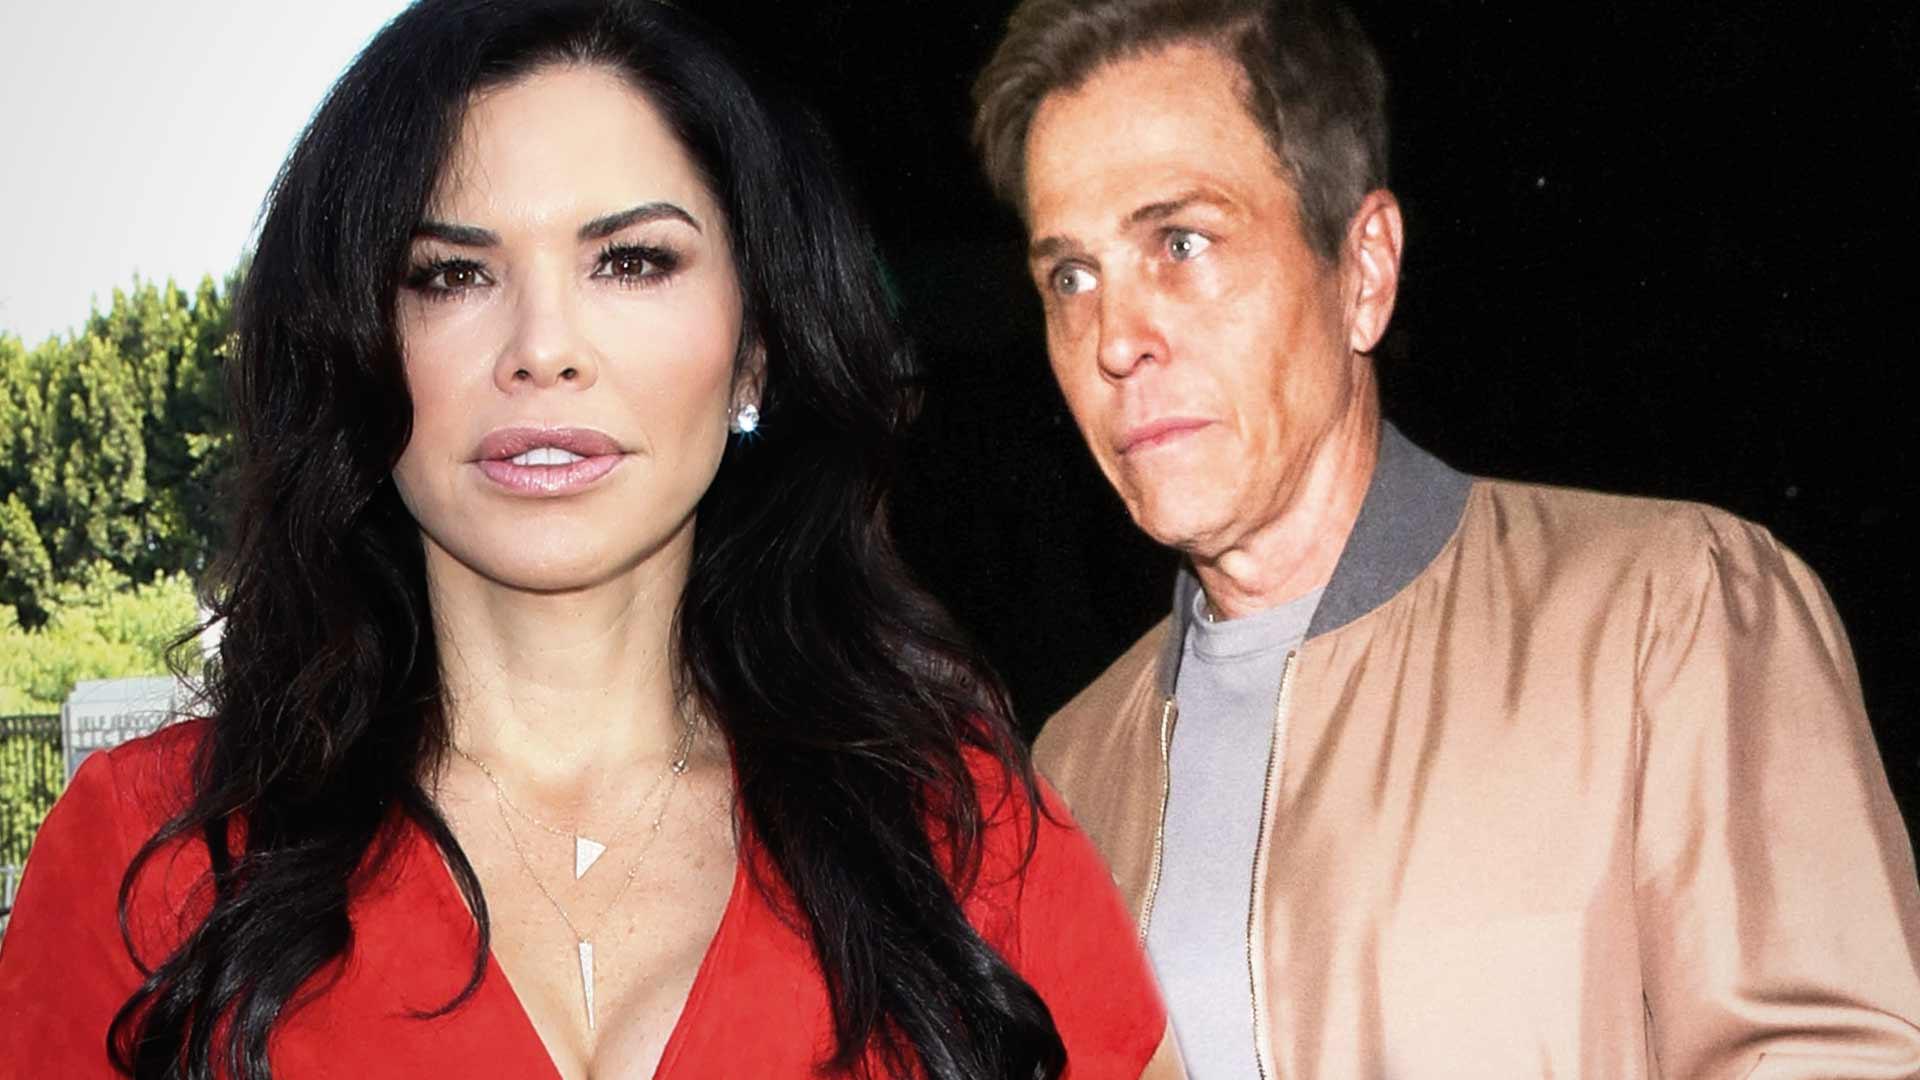 Lauren Sanchez Leaves Off Date of Separation in Divorce from Patrick Whitesell